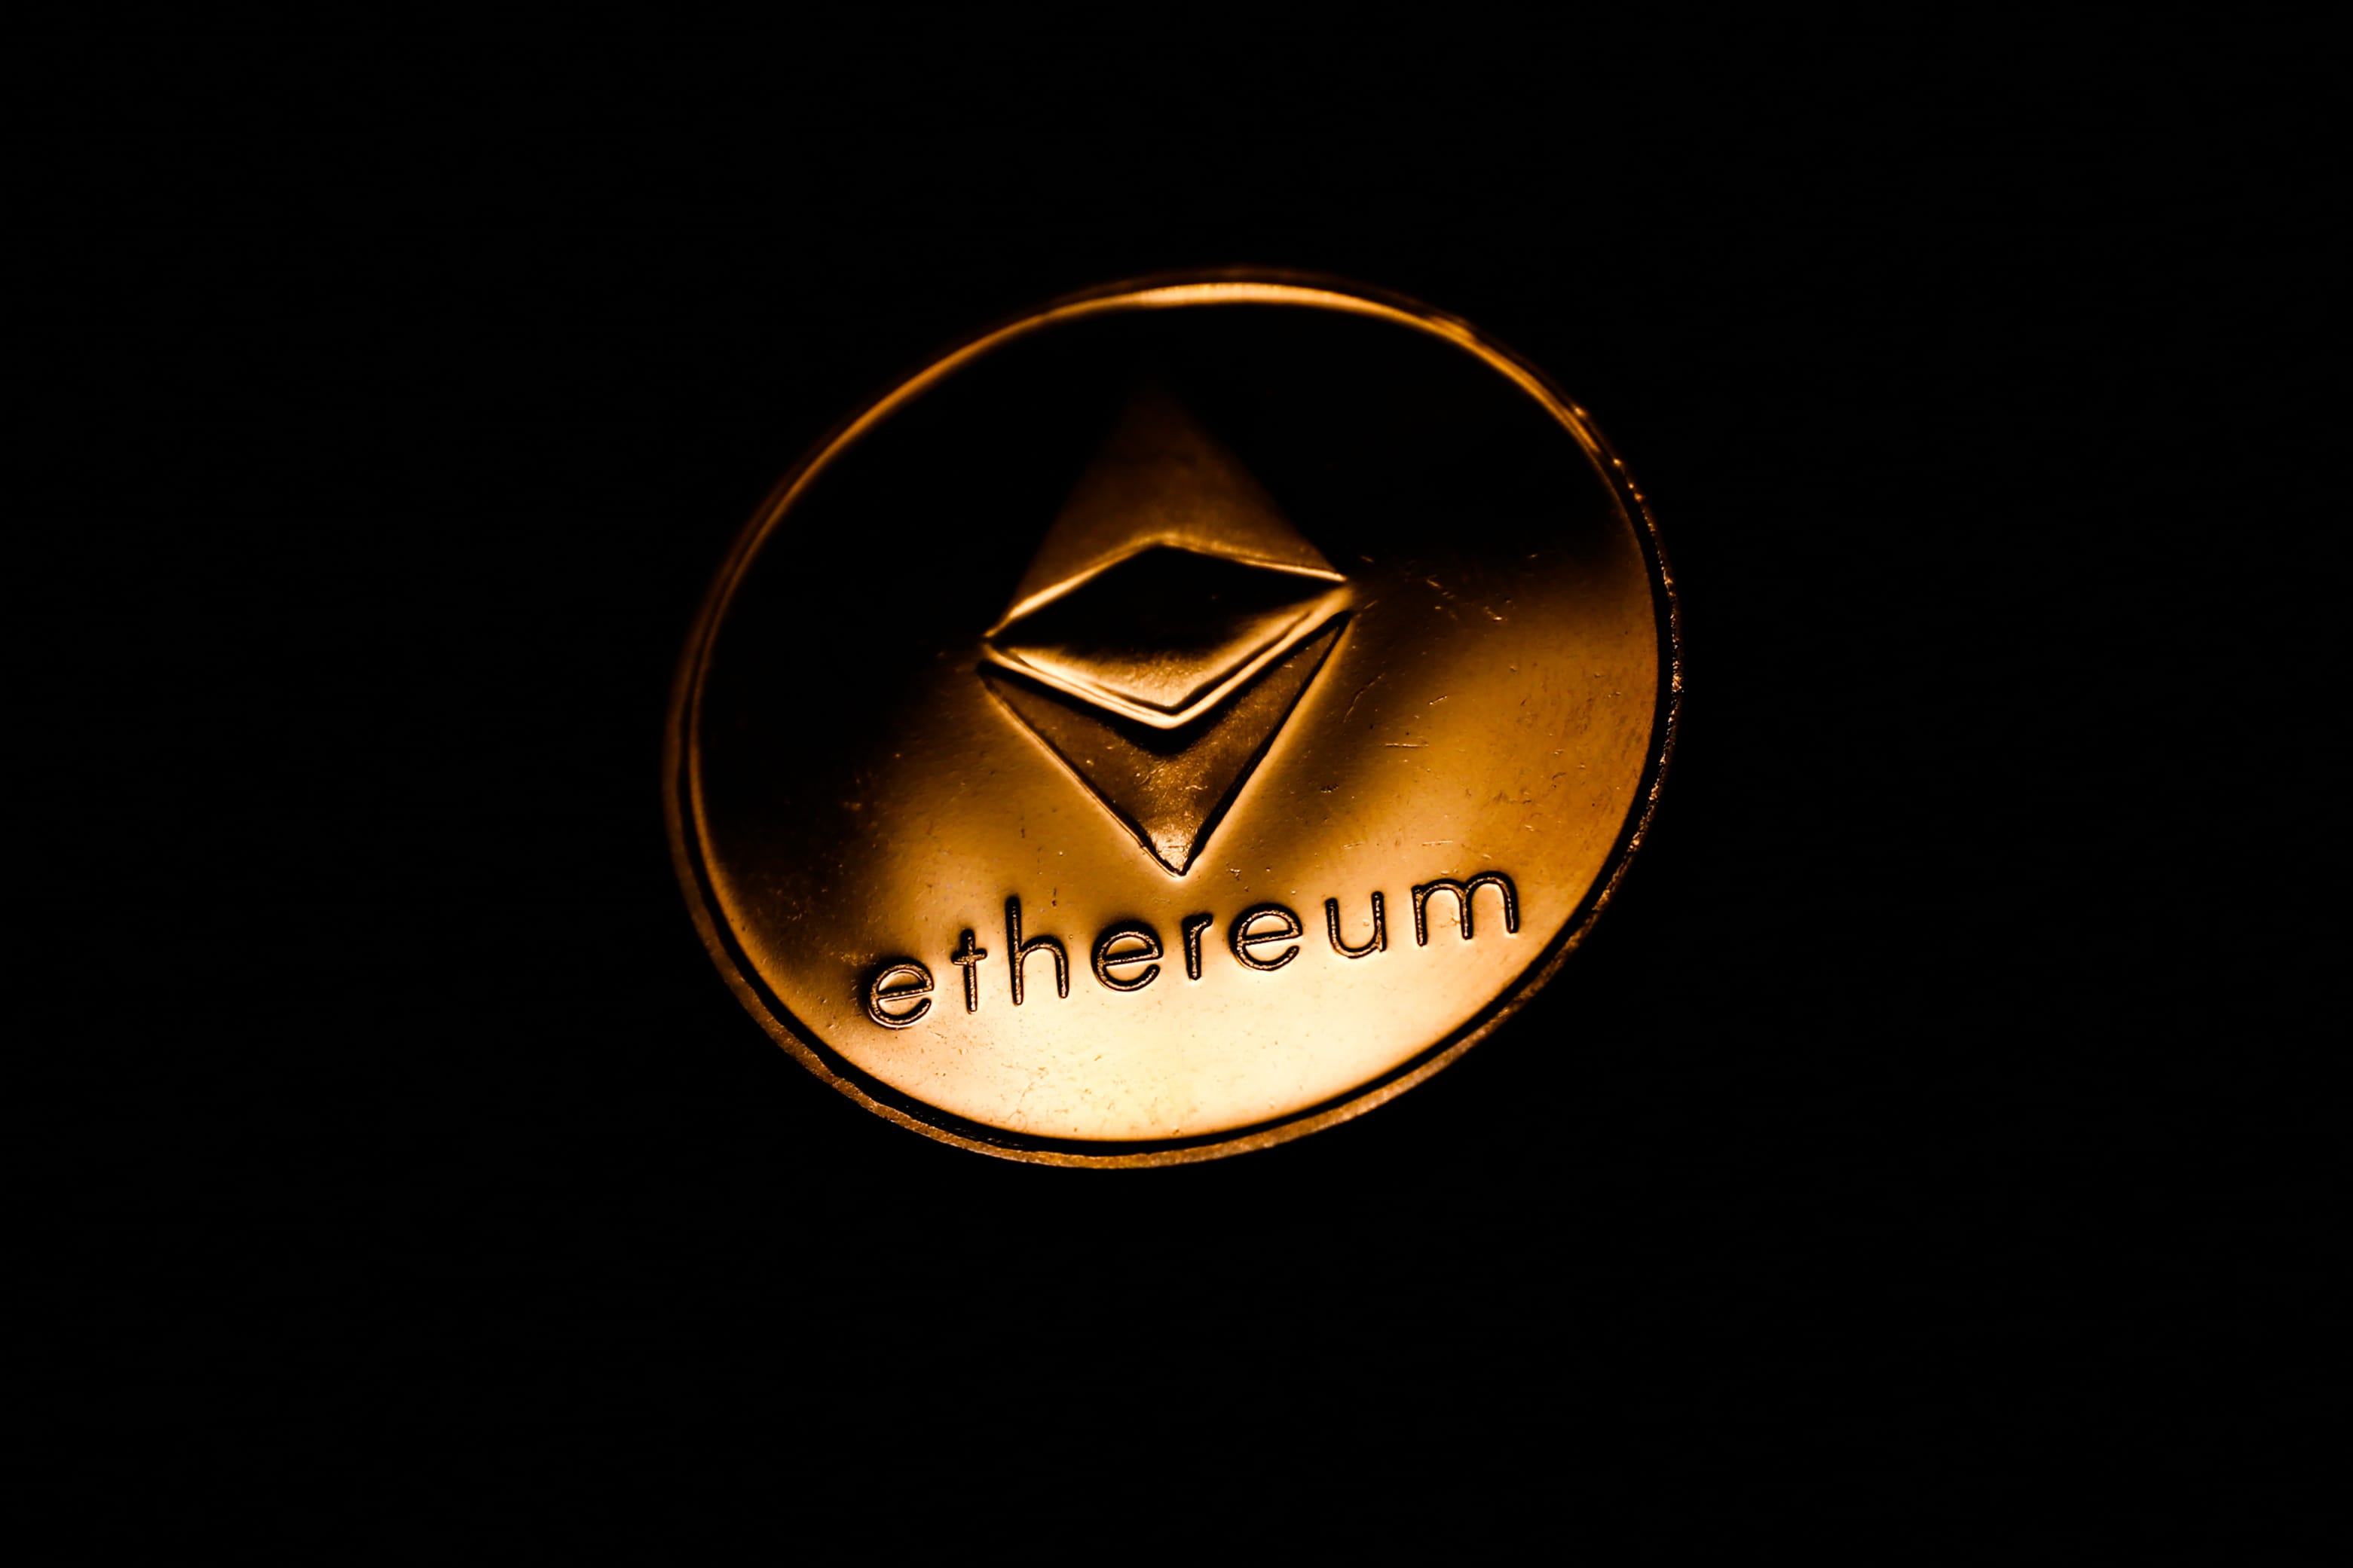 Ether reaches a nine-month high ahead of Chabela’s upgrade